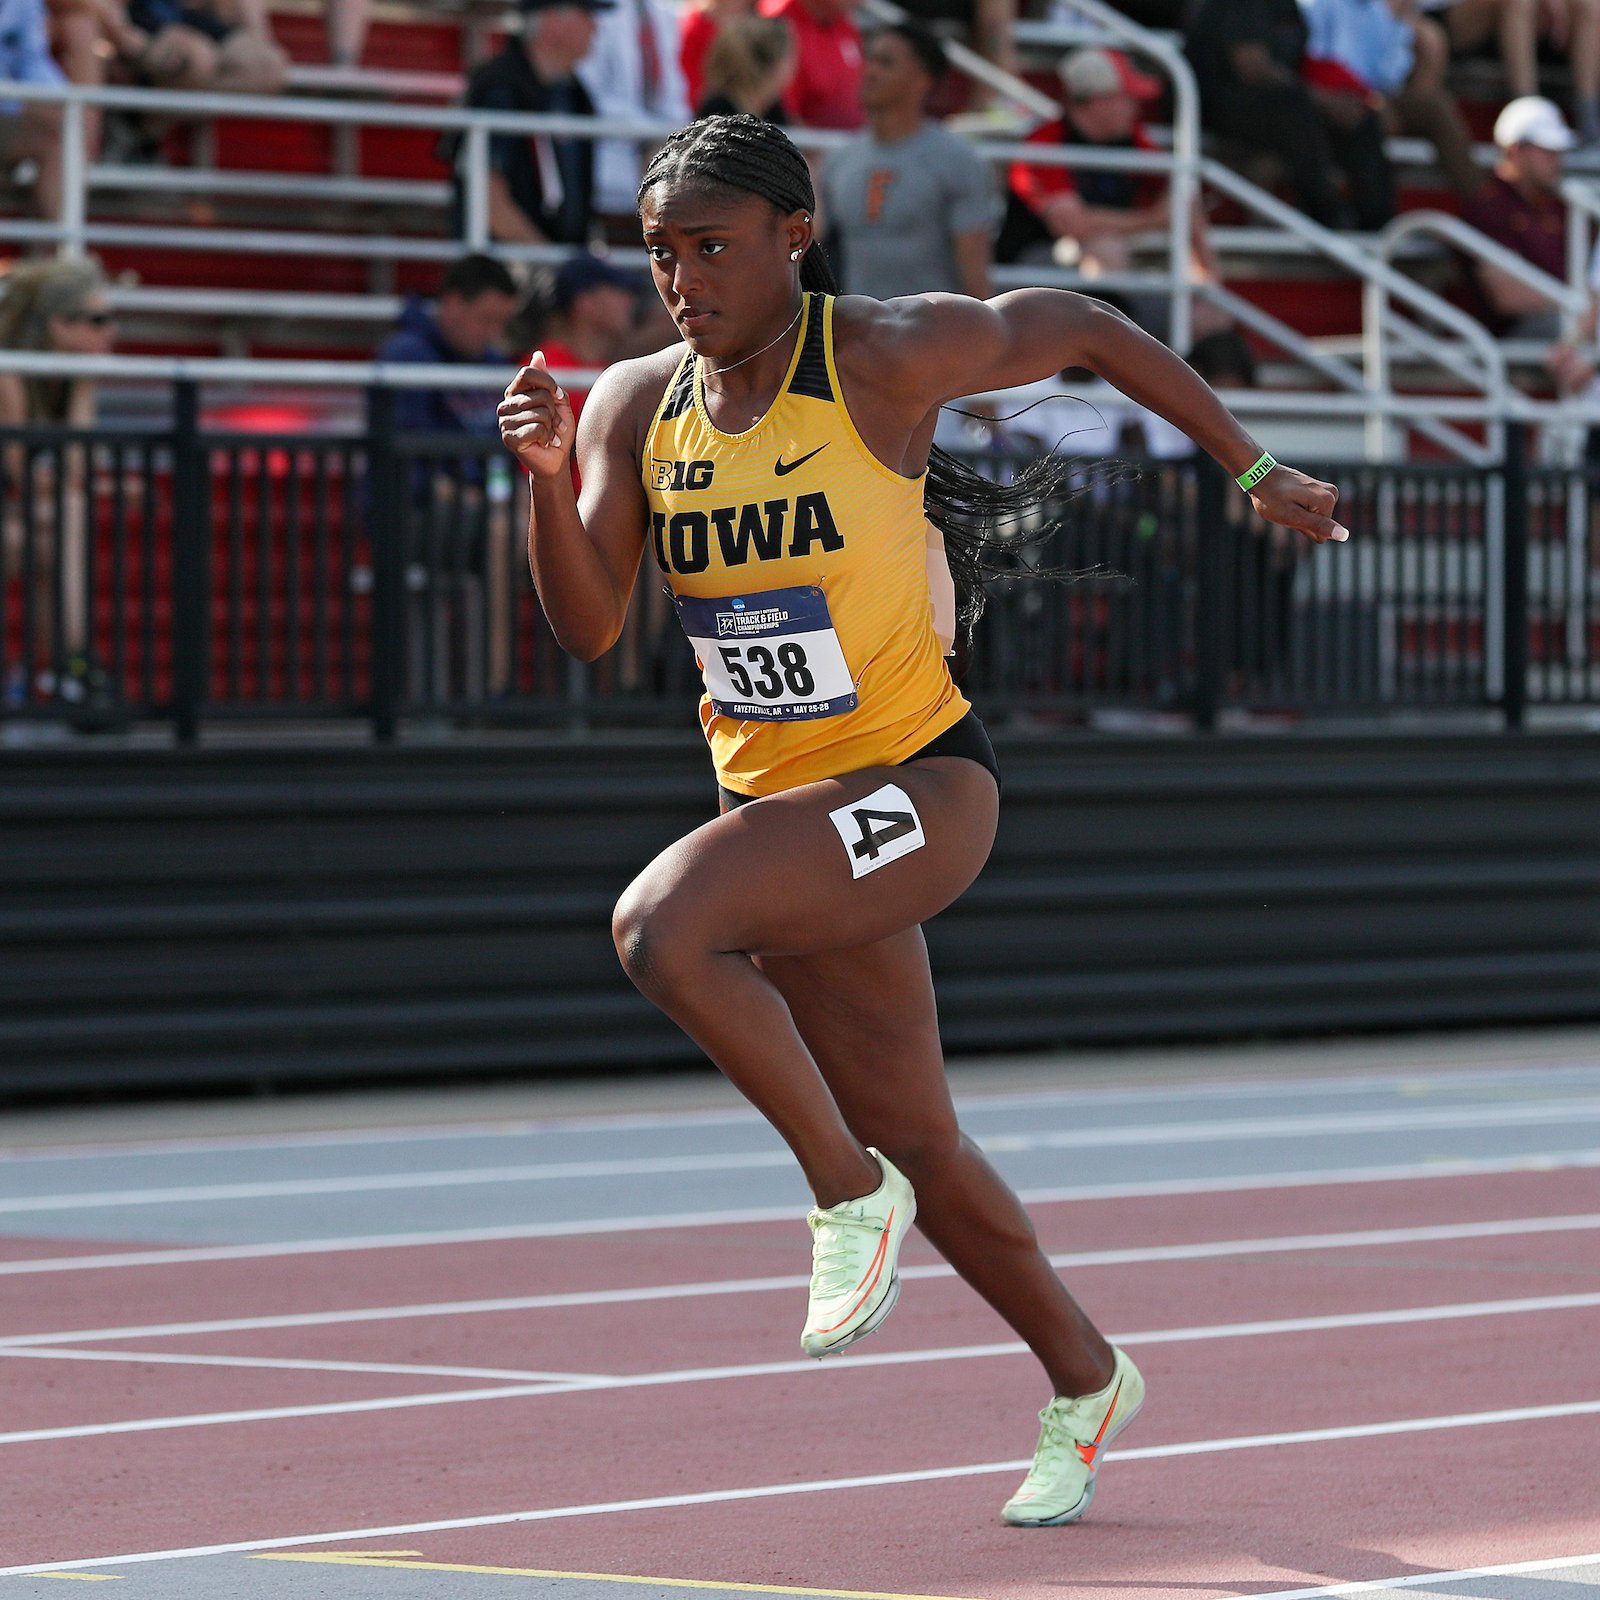 Lia Love running for the University of Iowa at a track event